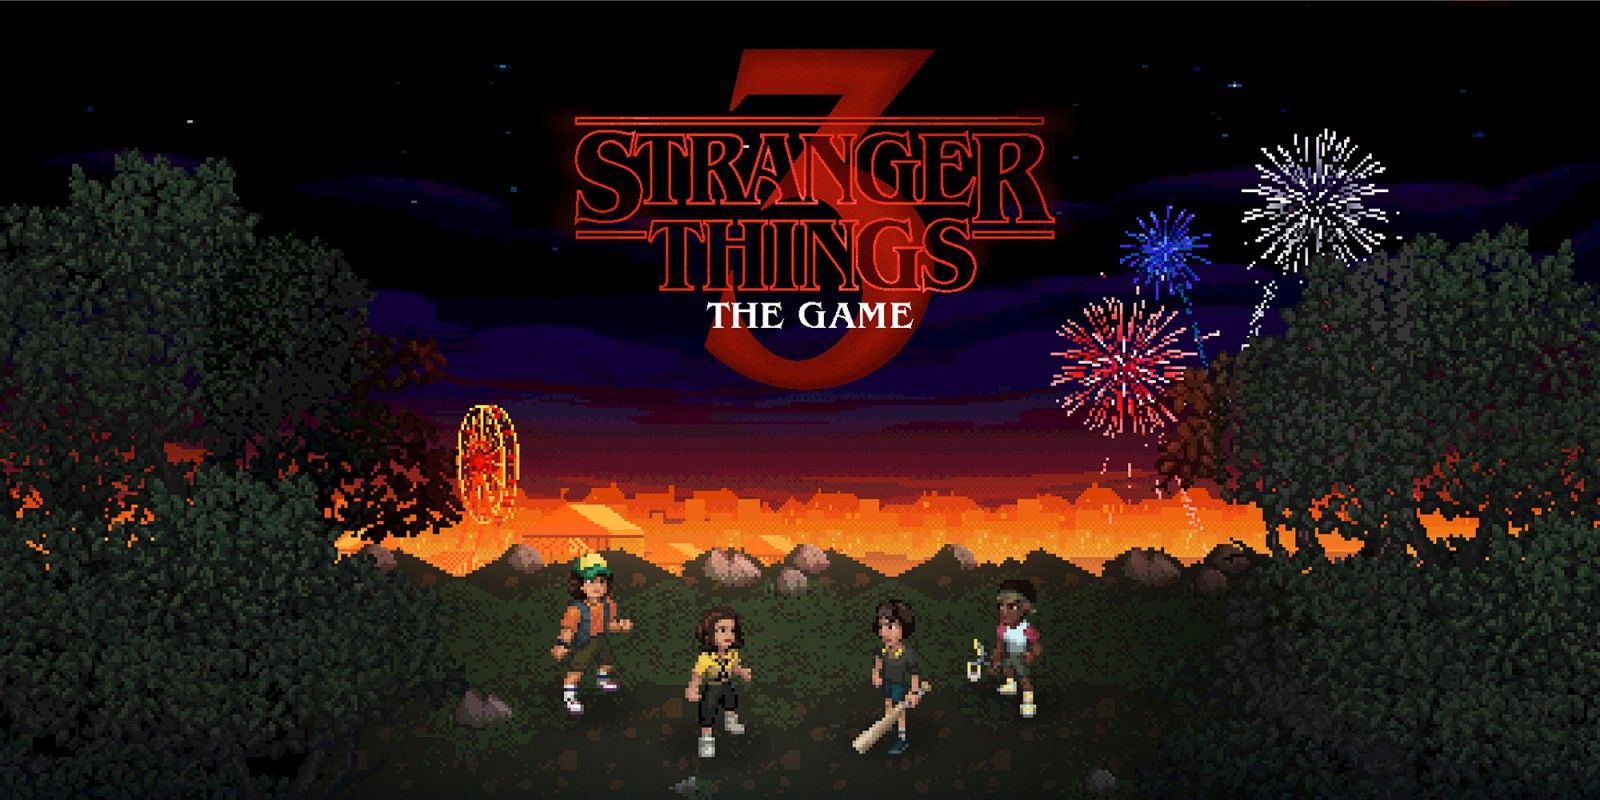 A promotional image featuring pixel art renditions of the Stranger Things cast